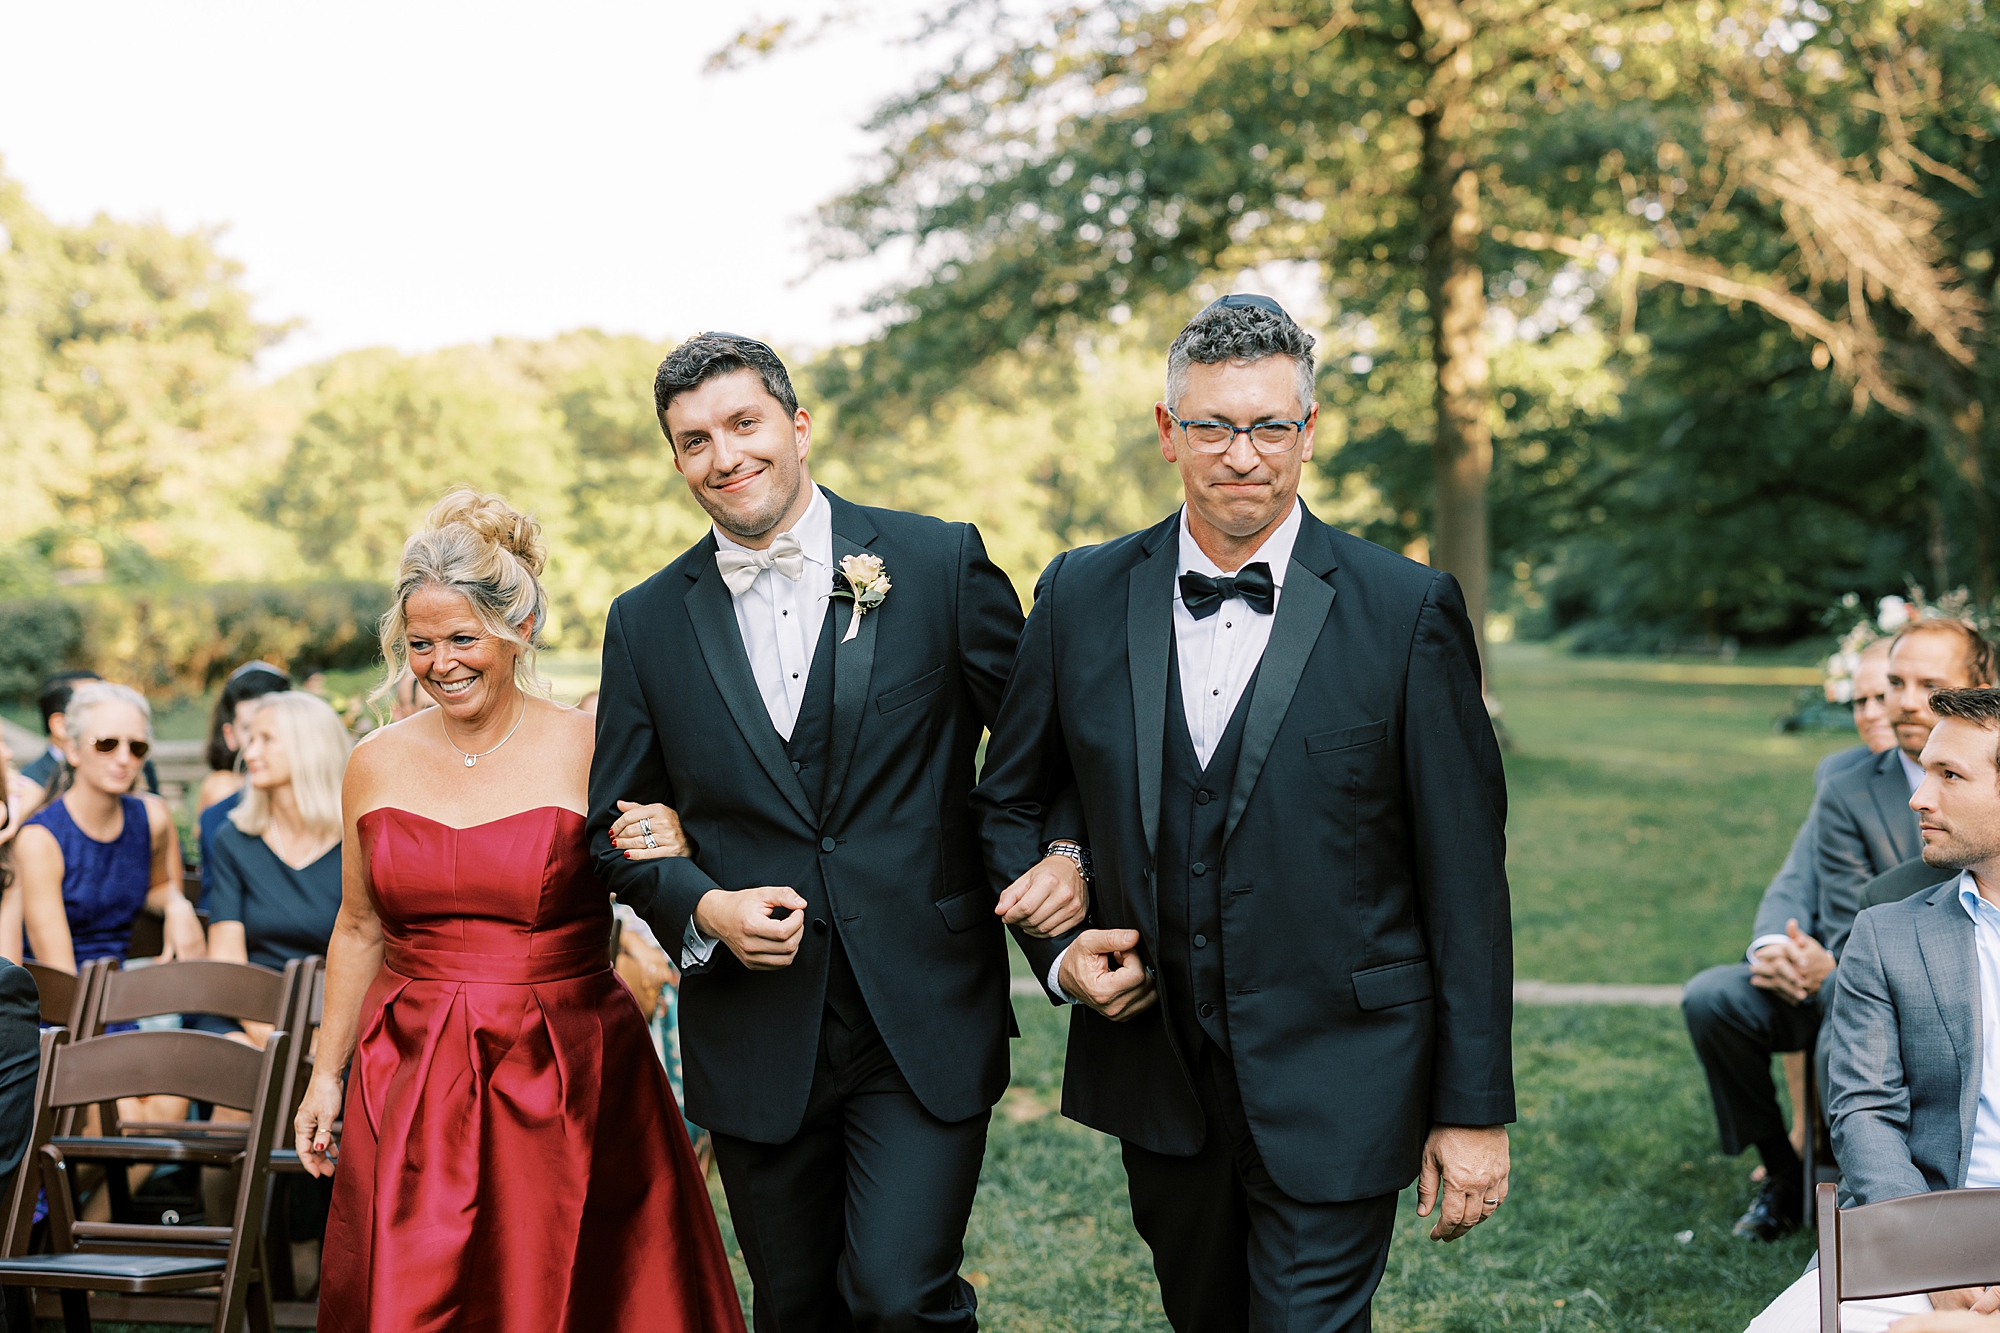 groom walks down aisle with parents for wedding ceremony on lawn at Curtis Arboretum